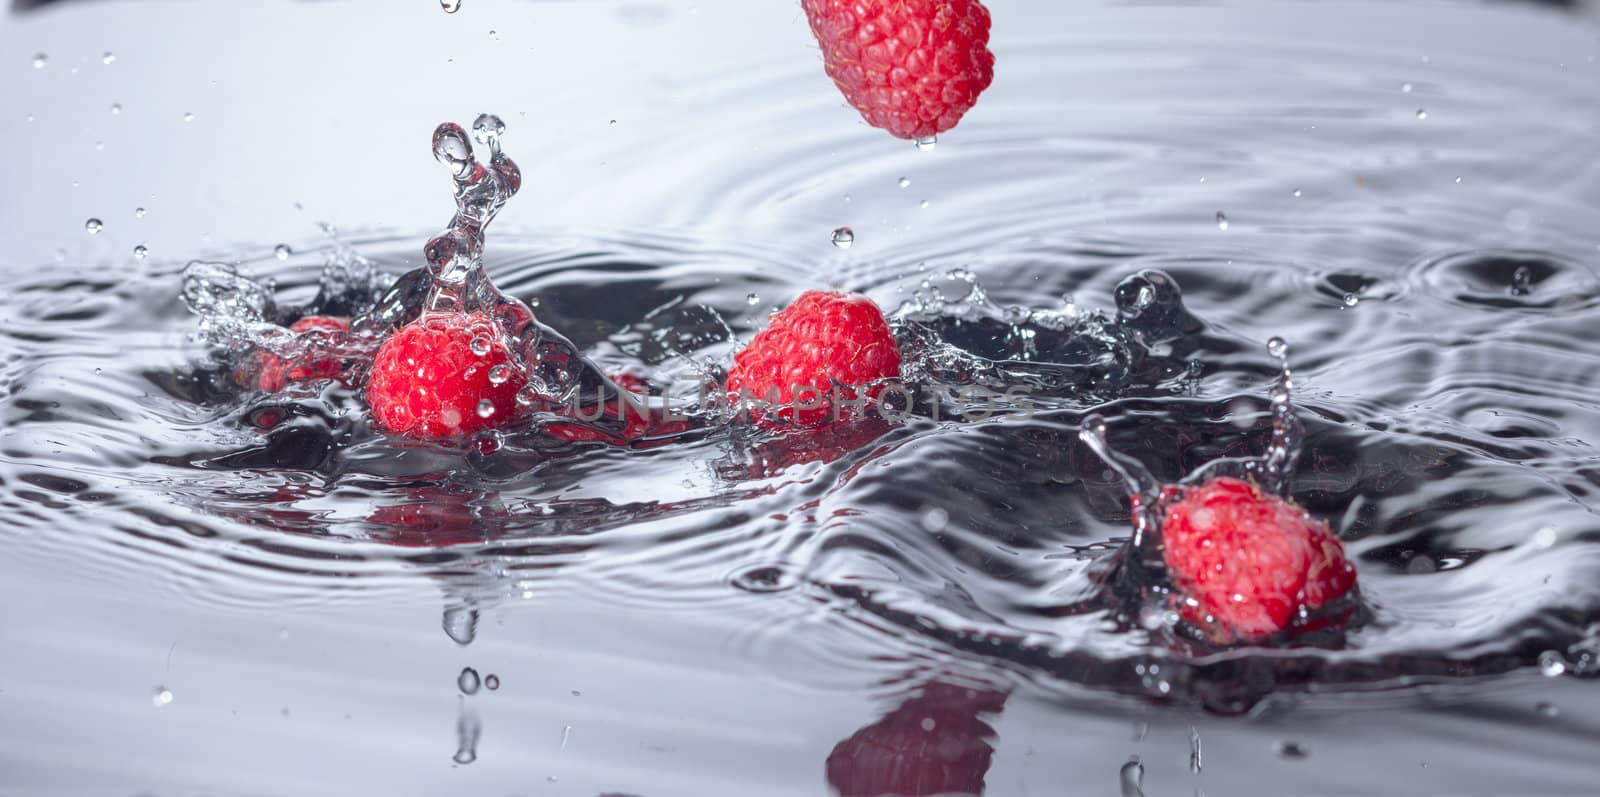 Red Raspberries Dropped into Water with Splash, closeup